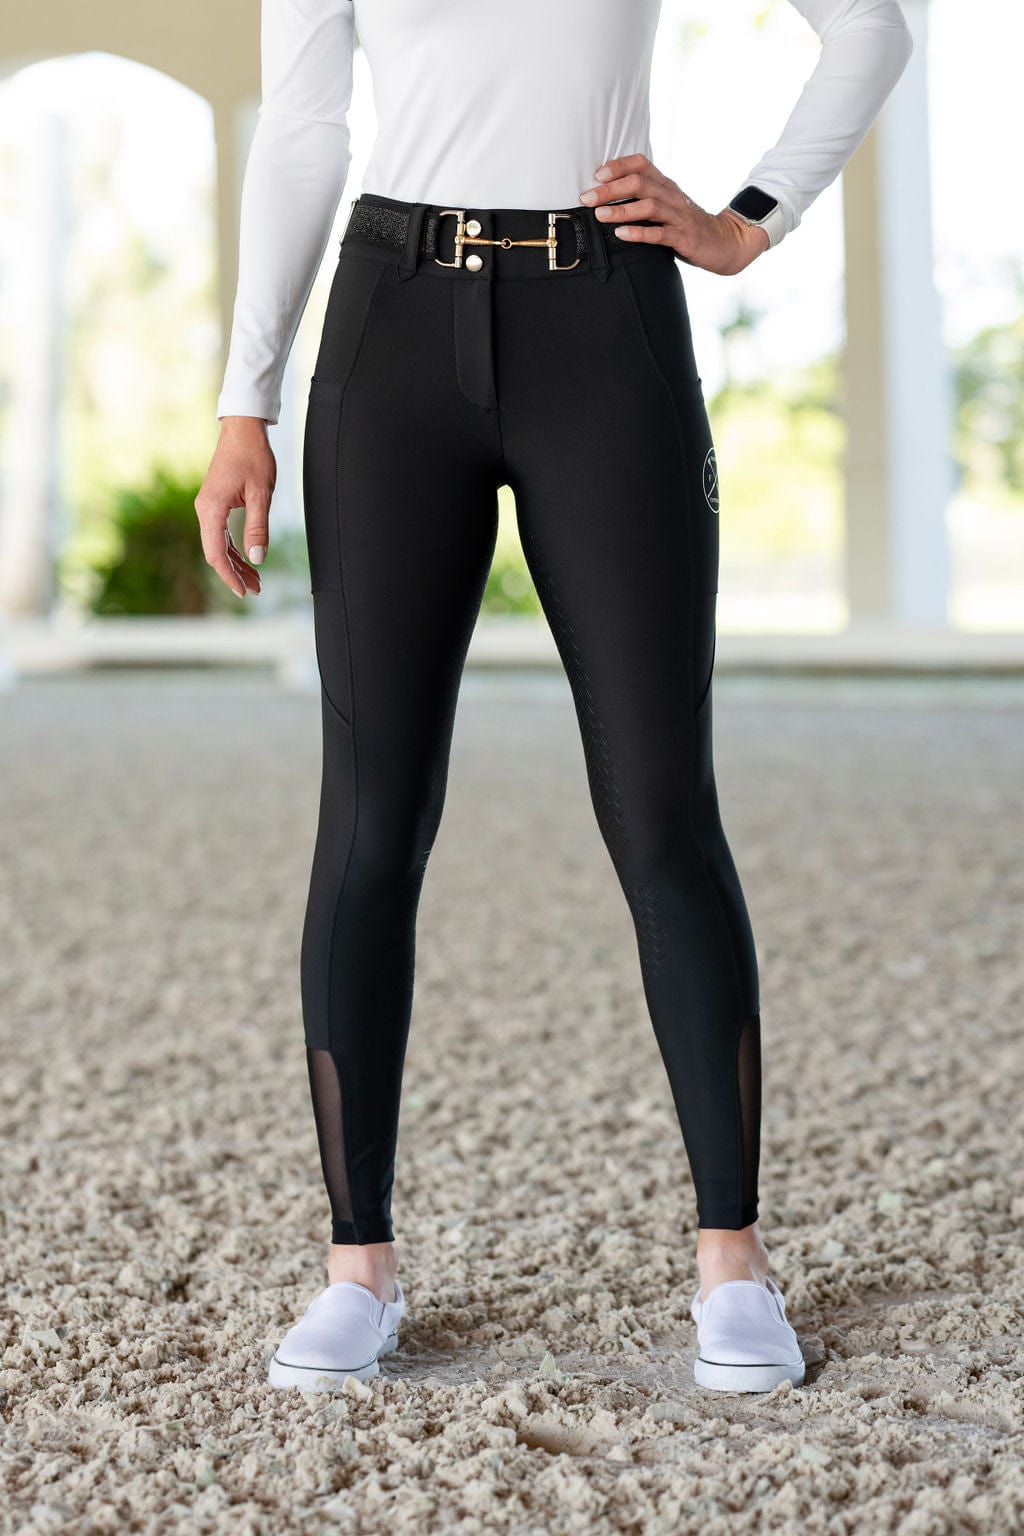 Best Black Lux Breech  Free Ride designs high quality apparel and